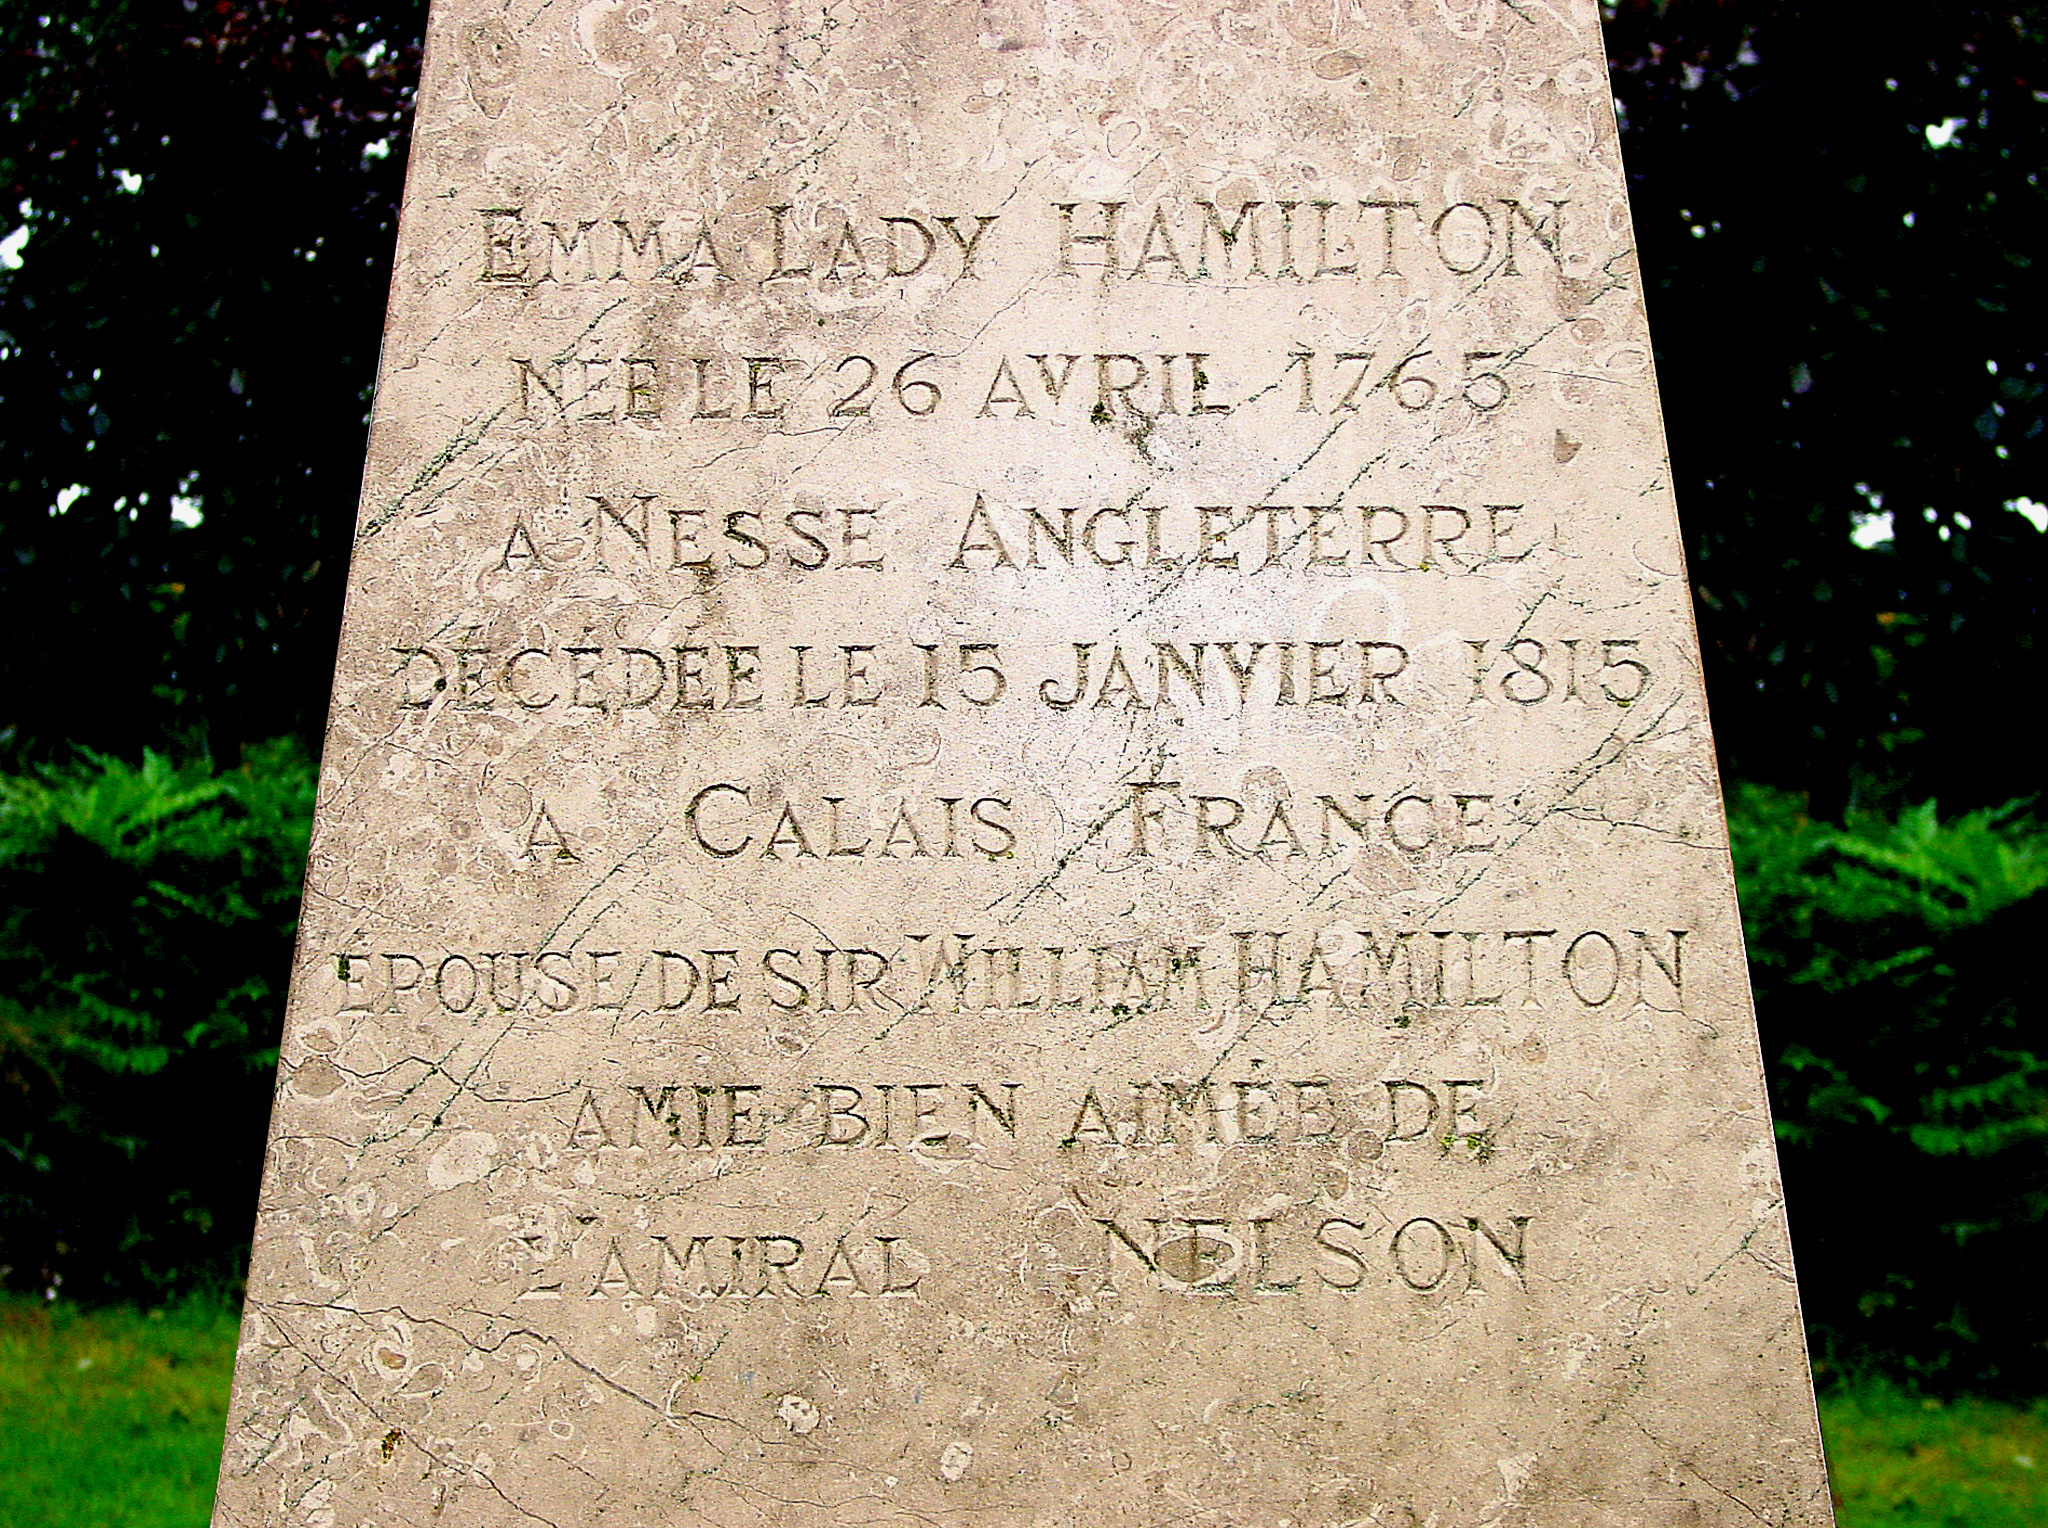 The First Memorial To Emma Lady Hamilton Projects The 1805 Club